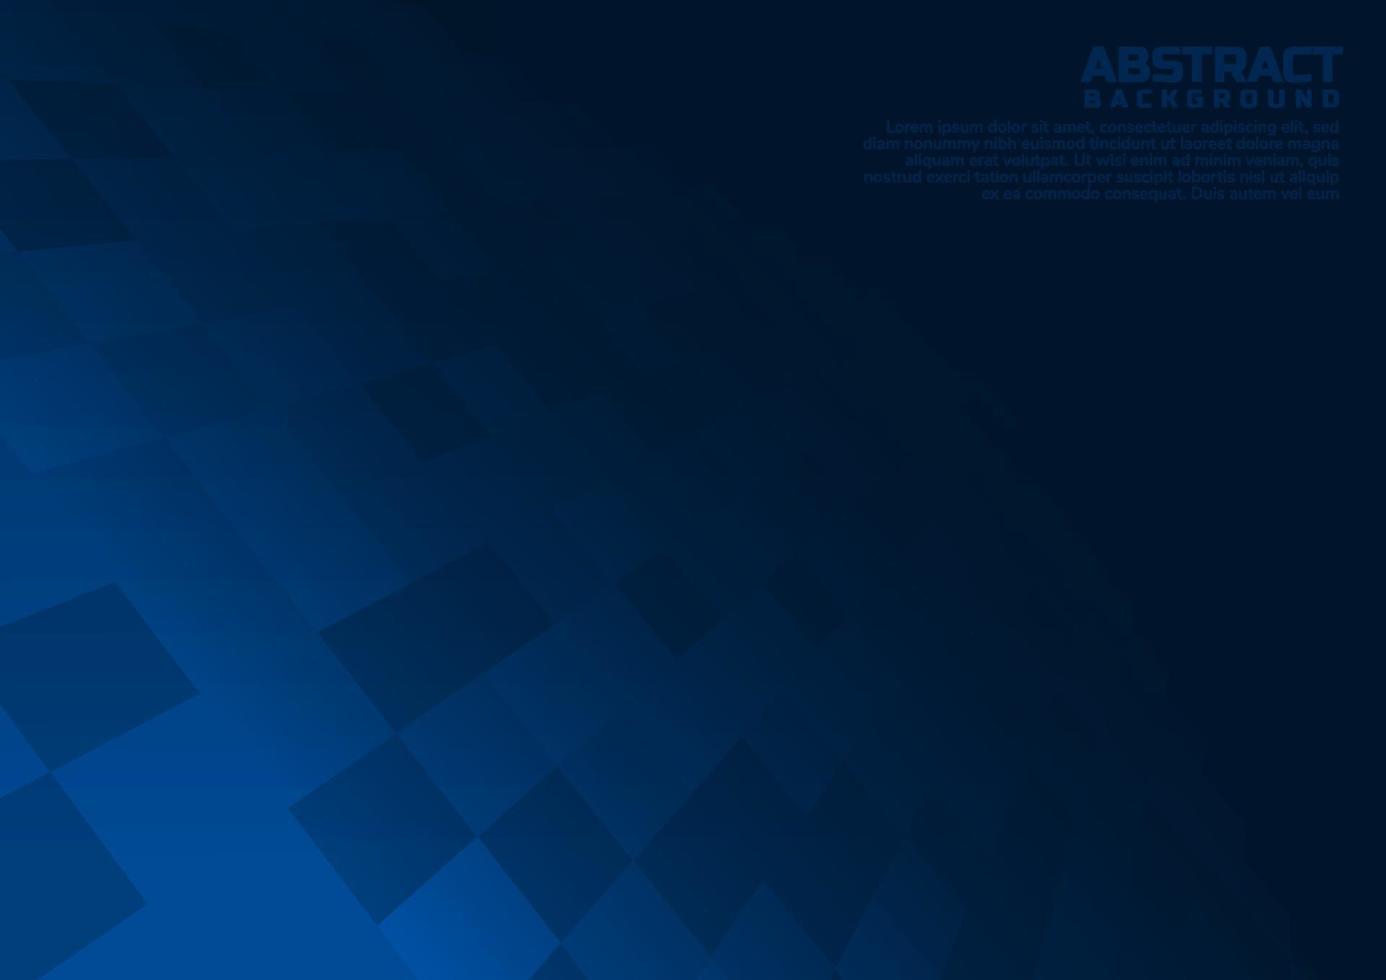 Abstract geometric blue square pattern background with white shapes perspective can be used in cover design  poster  website  flyer. vector